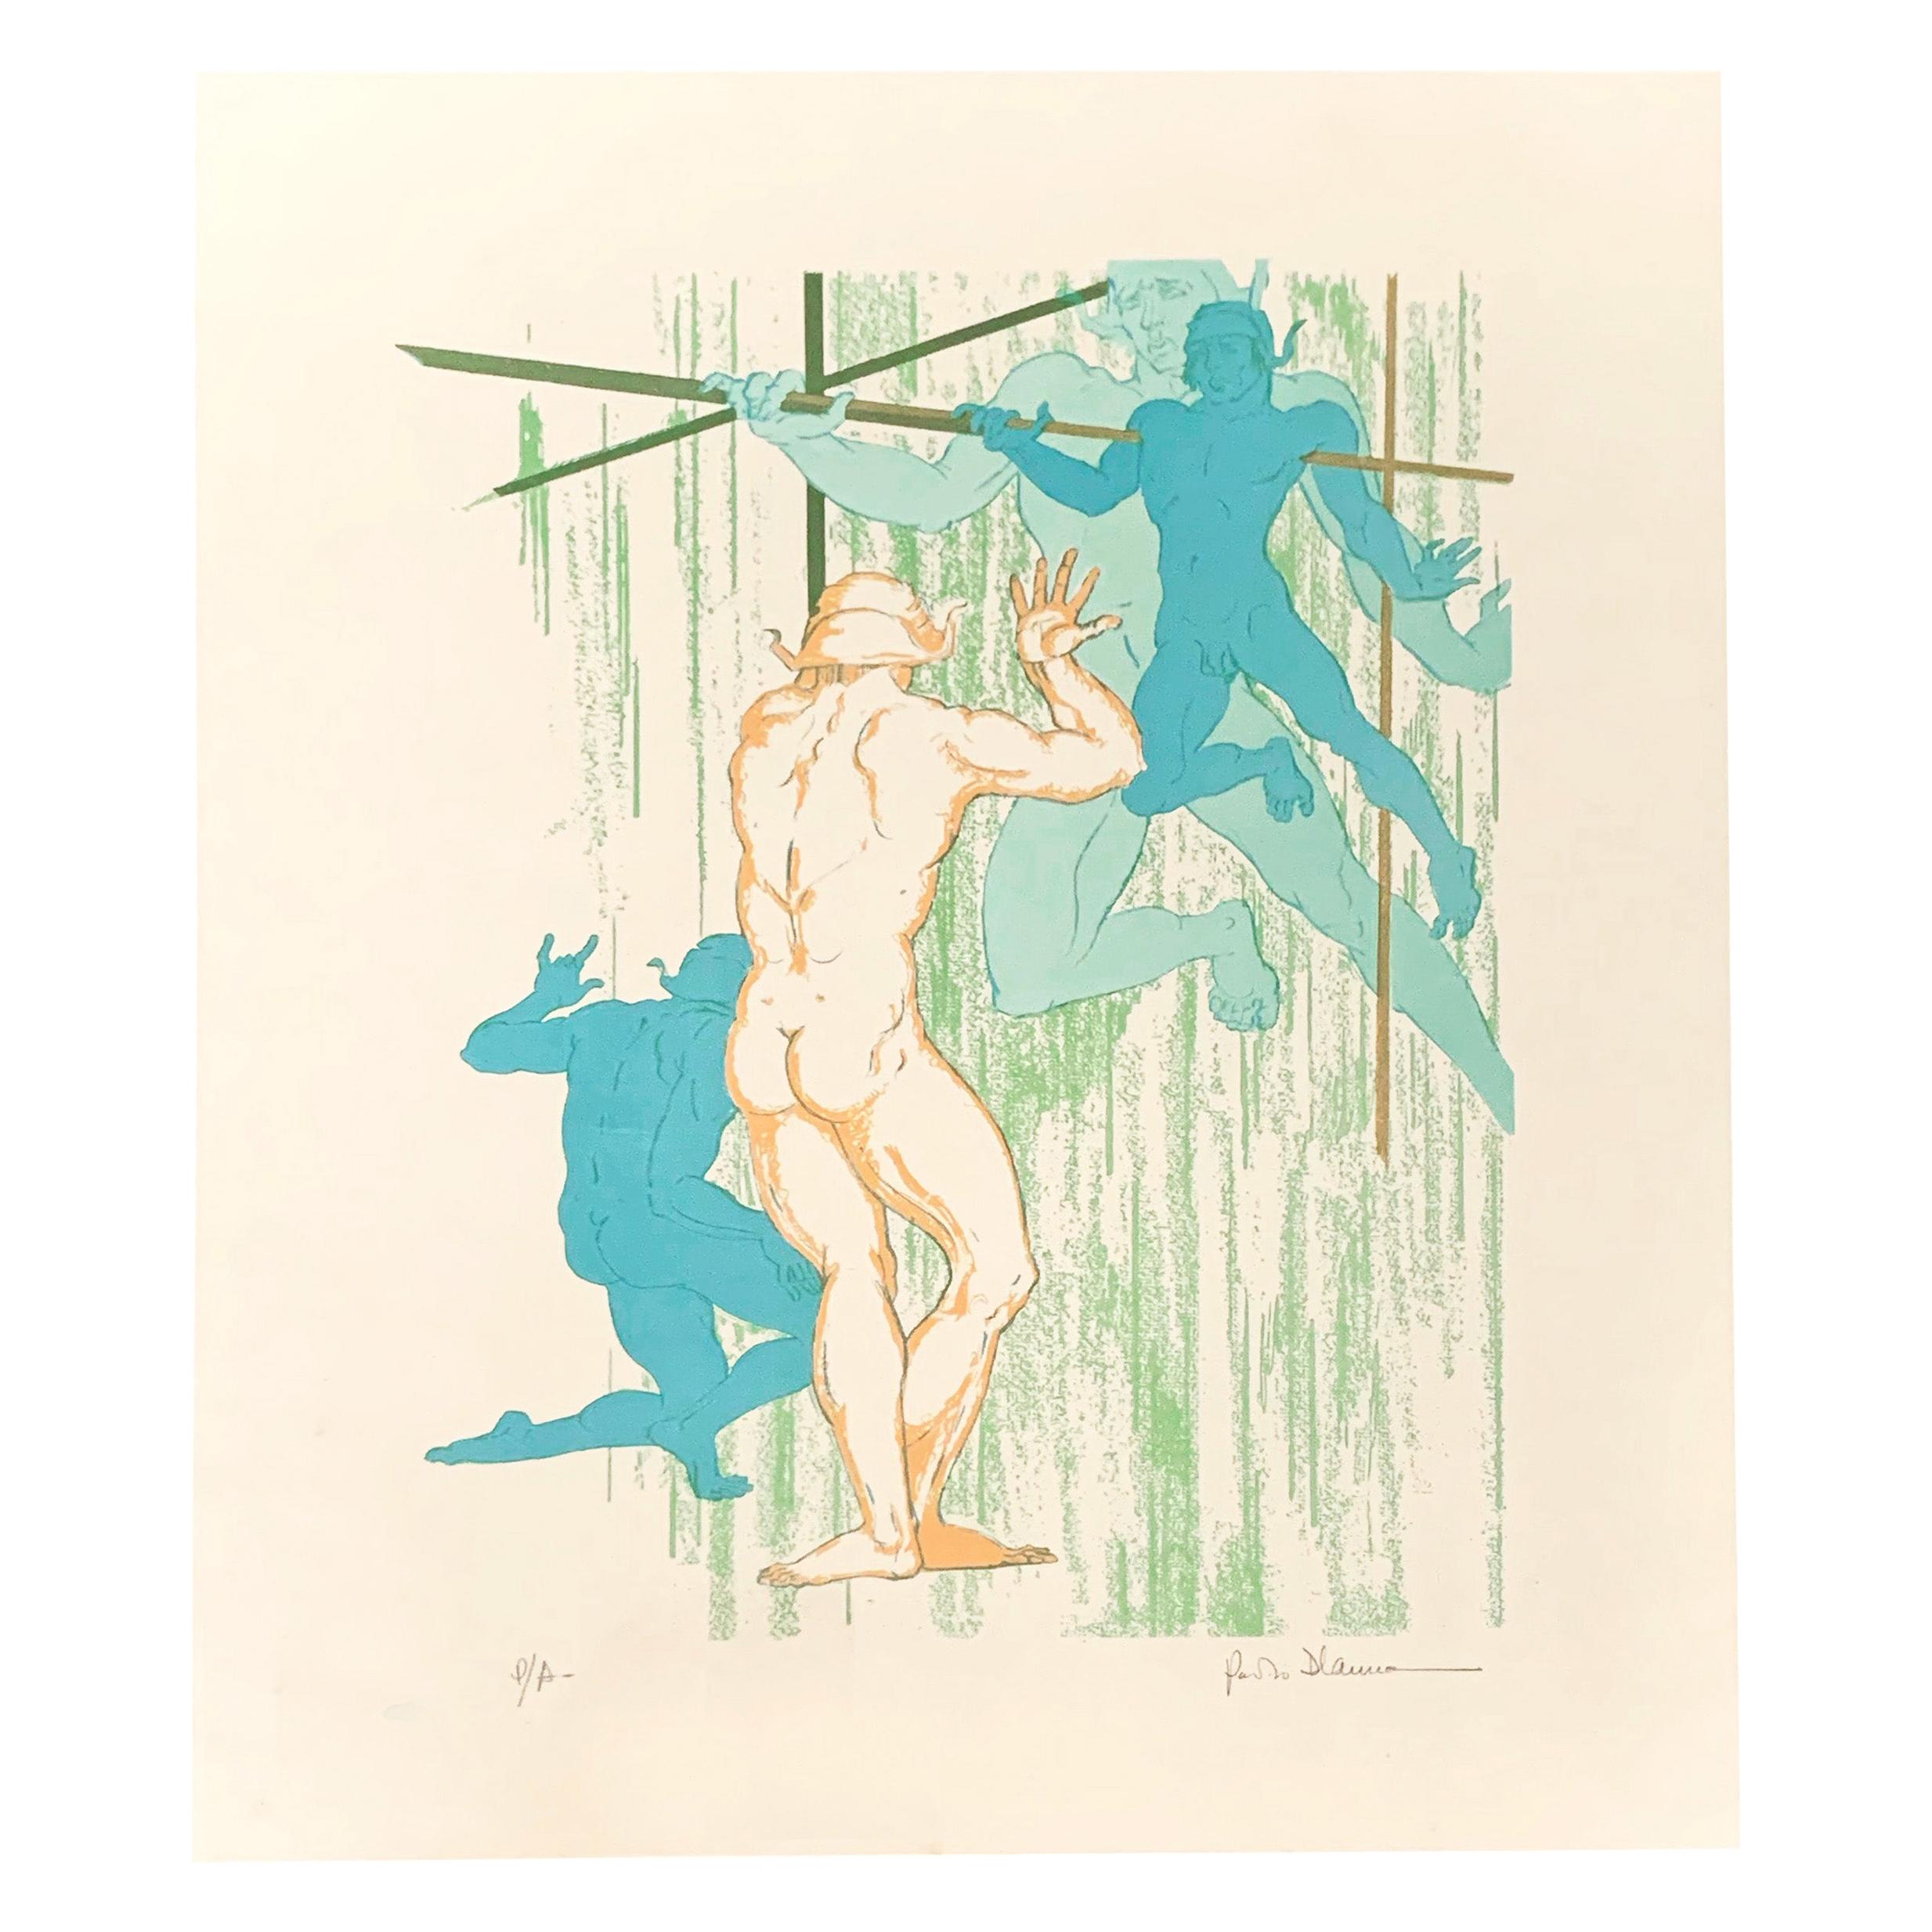 "Nude Dancers, " Rare Midcentury Color Print with Male Nudes by D'Anna For Sale